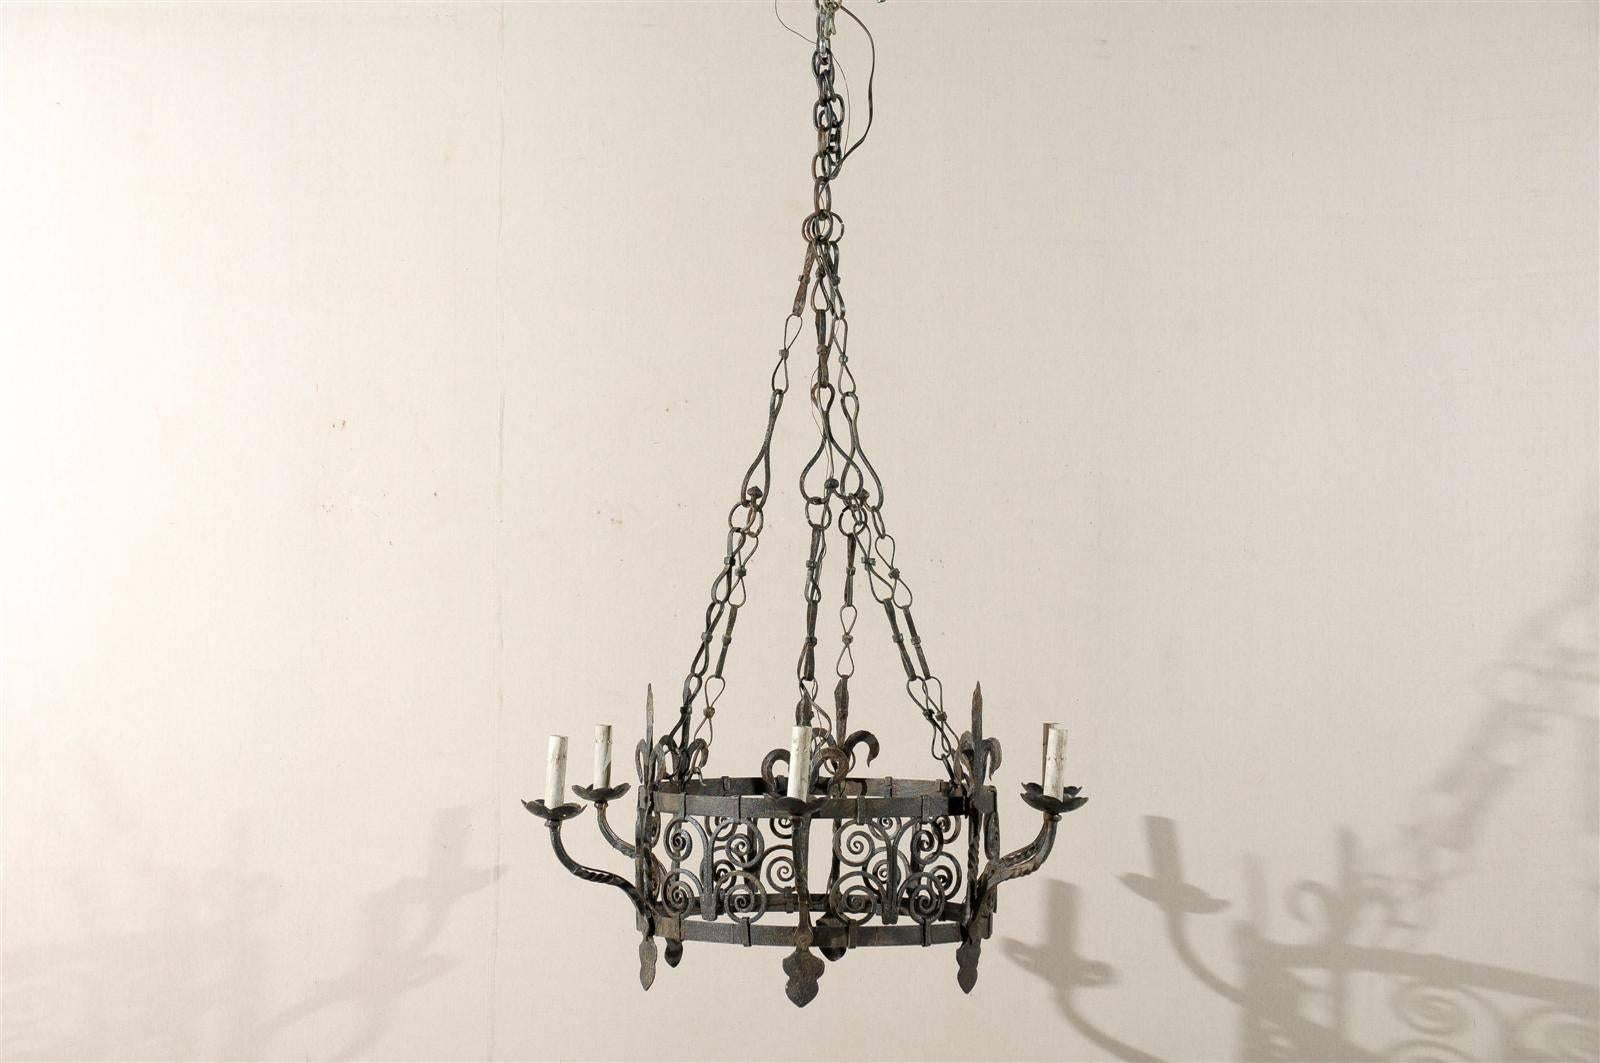 A French Gothic style mid-20th century iron six-light chandelier with stylized fleurs-de-lys as well as scrolled motifs on the central circular ring.

This iron chandelier has been rewired for the US and comes with a complimentary 3 foot chain and